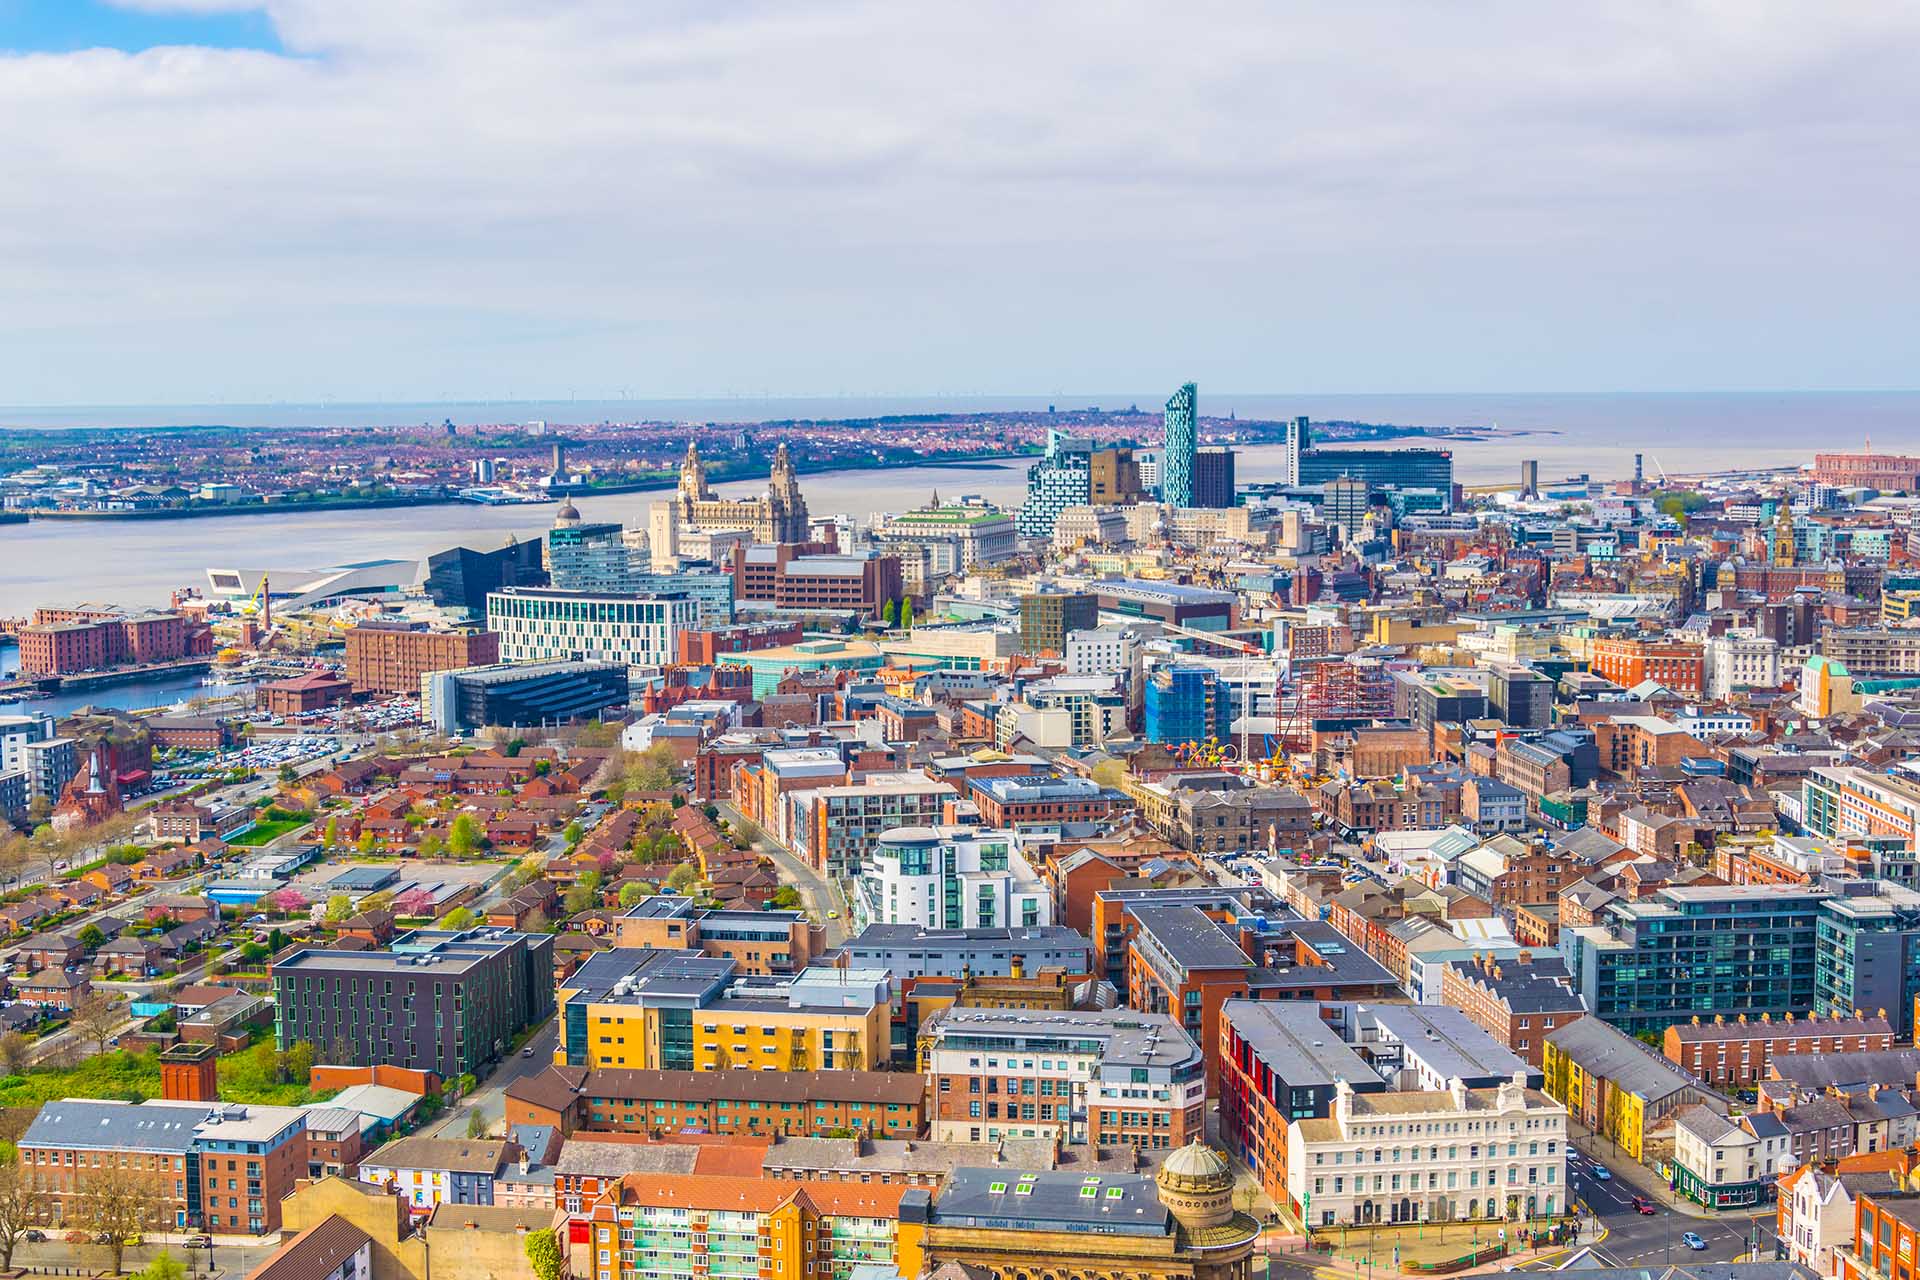 Aerial view of Liverpool City Centre